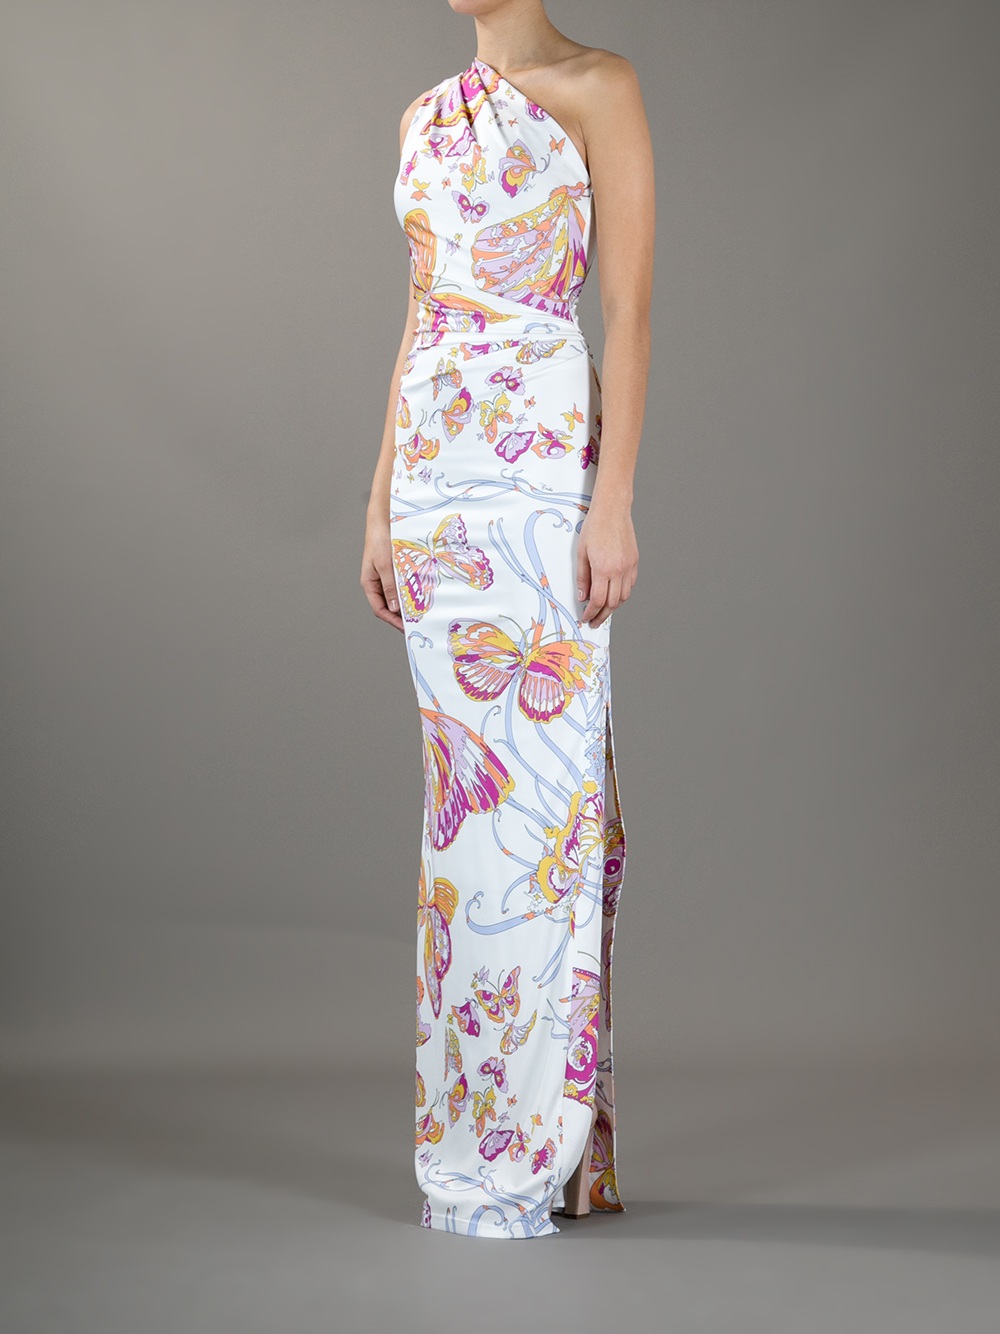 Lyst Emilio Pucci One Shoulder Butterfly Maxi Dress In White 8383